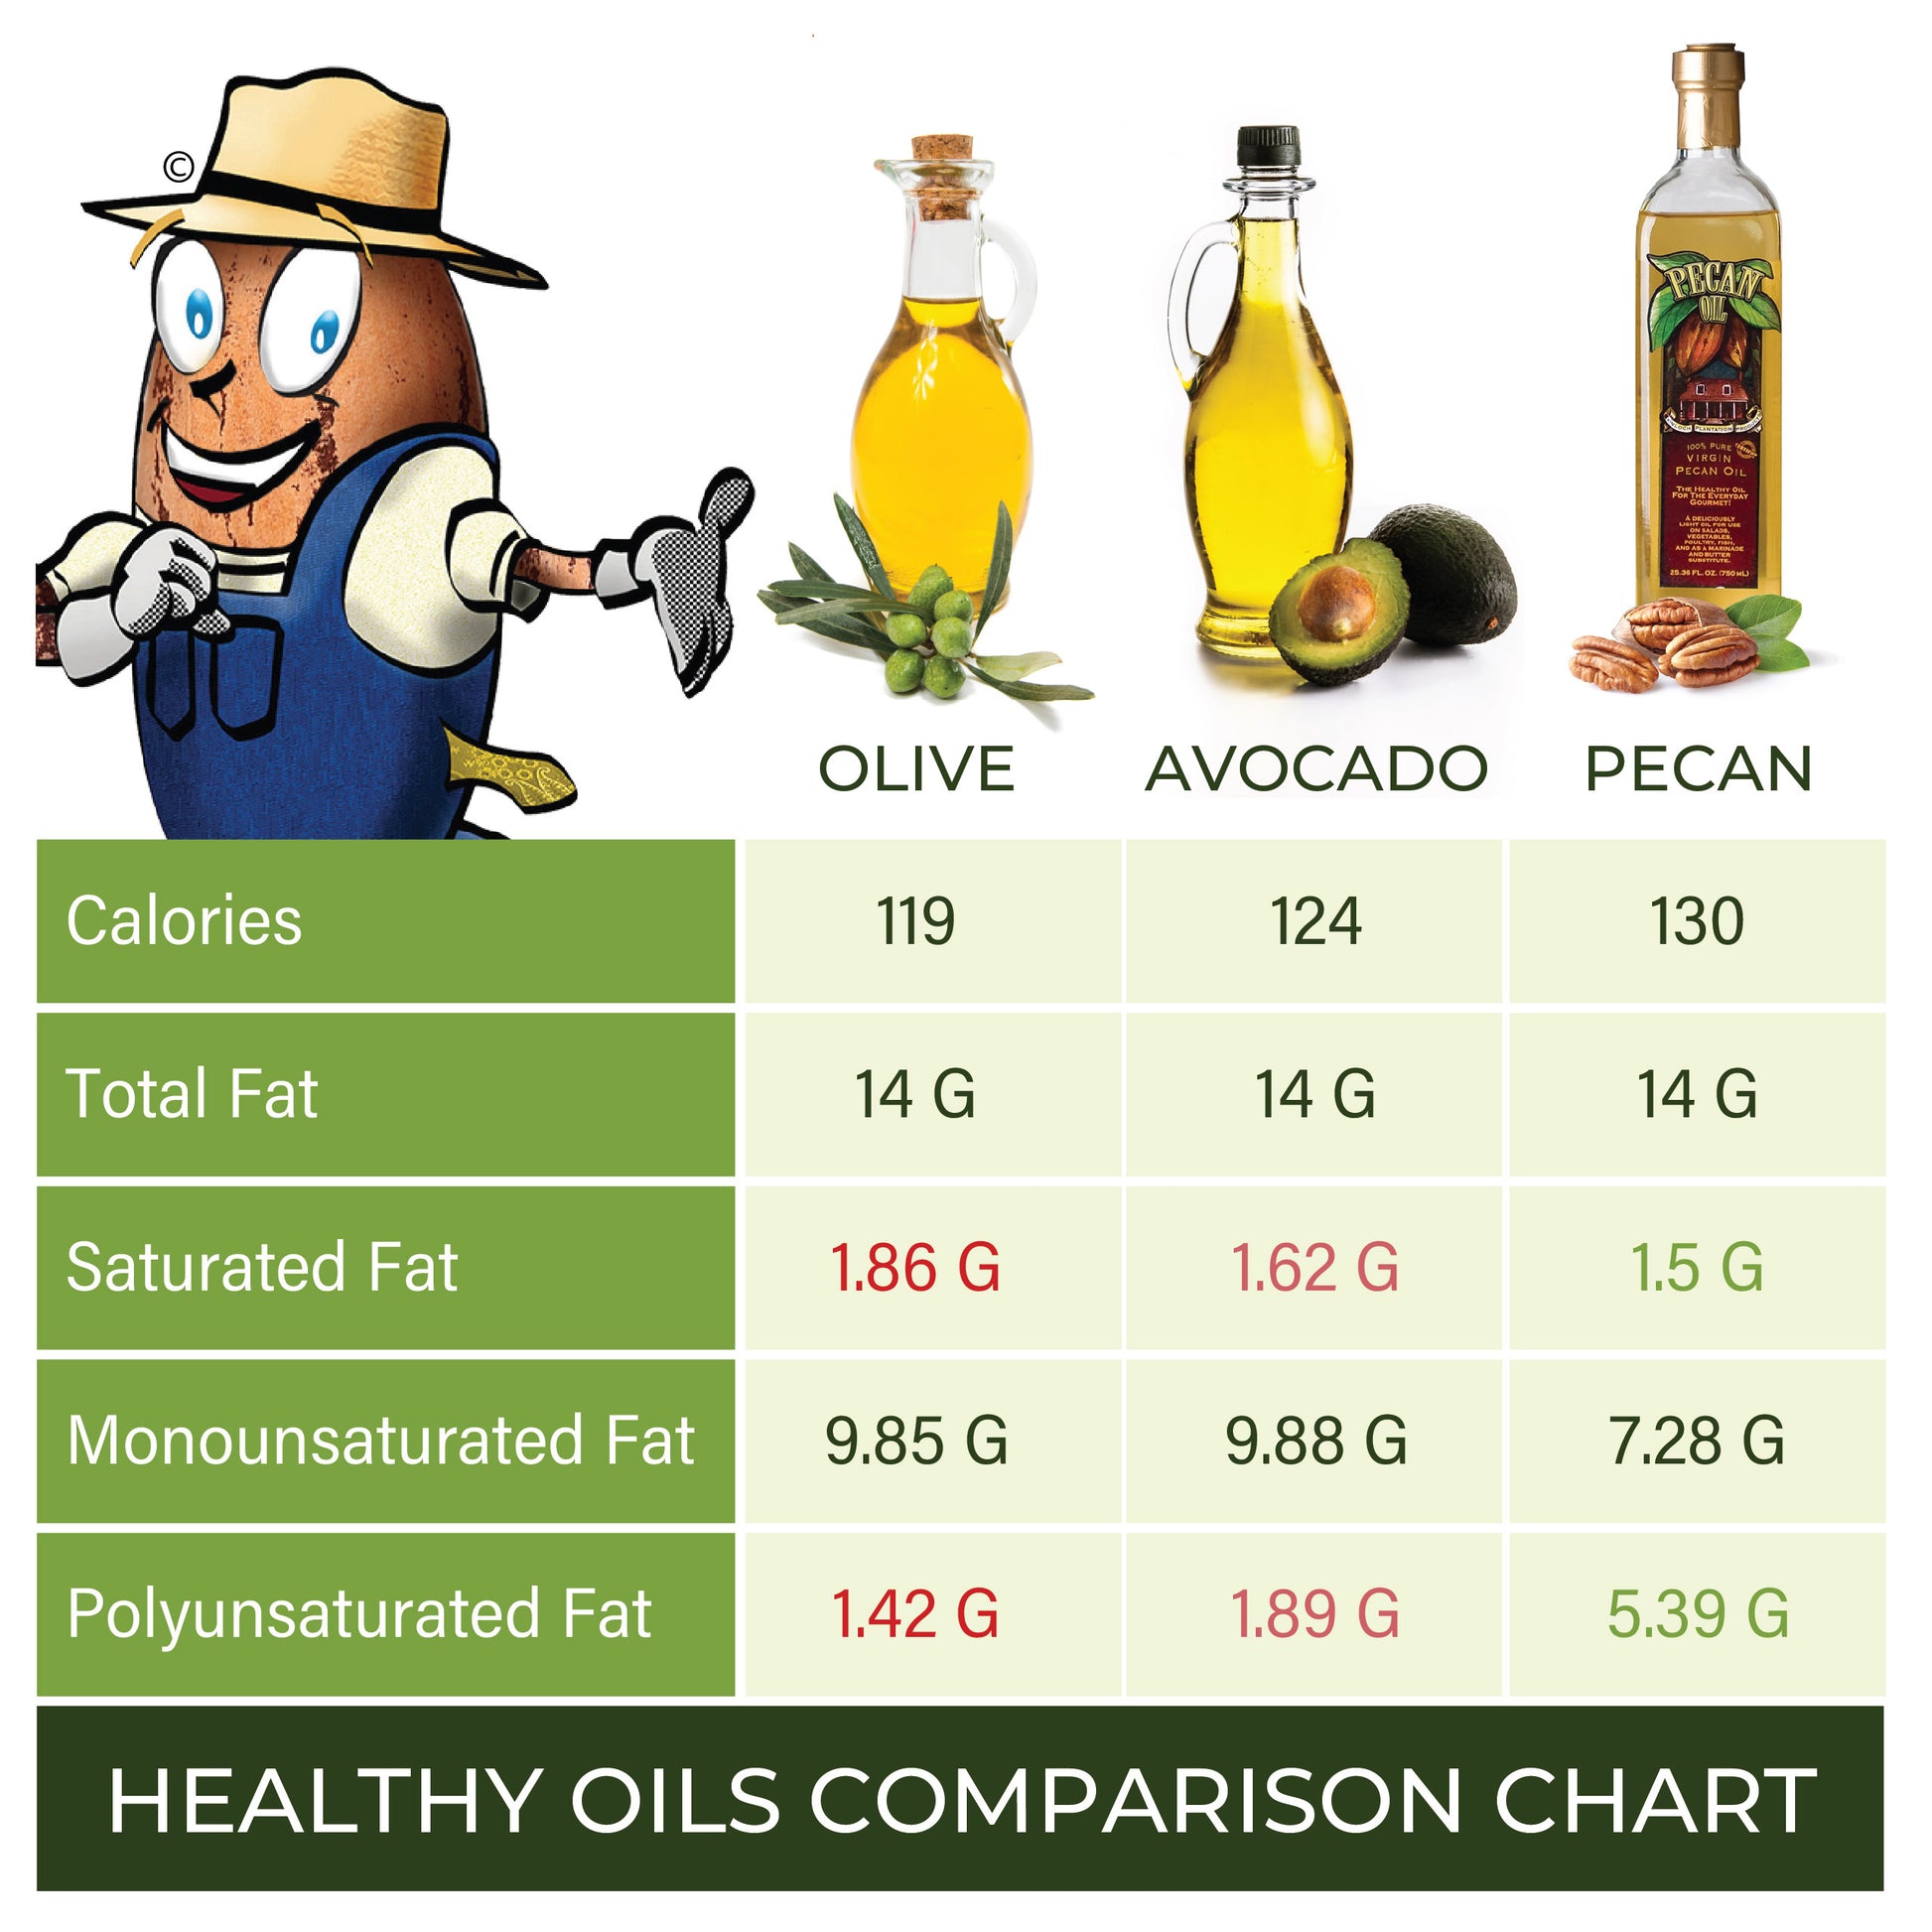 Olive oil, avocado oil, and pecan oil comparison chart. Less fat than olive oil, better than avocado oil, heart-healthy fats. Pecan oil is the lowest in unhealthy saturated fat and highest in healthy polyunsaturated fat.